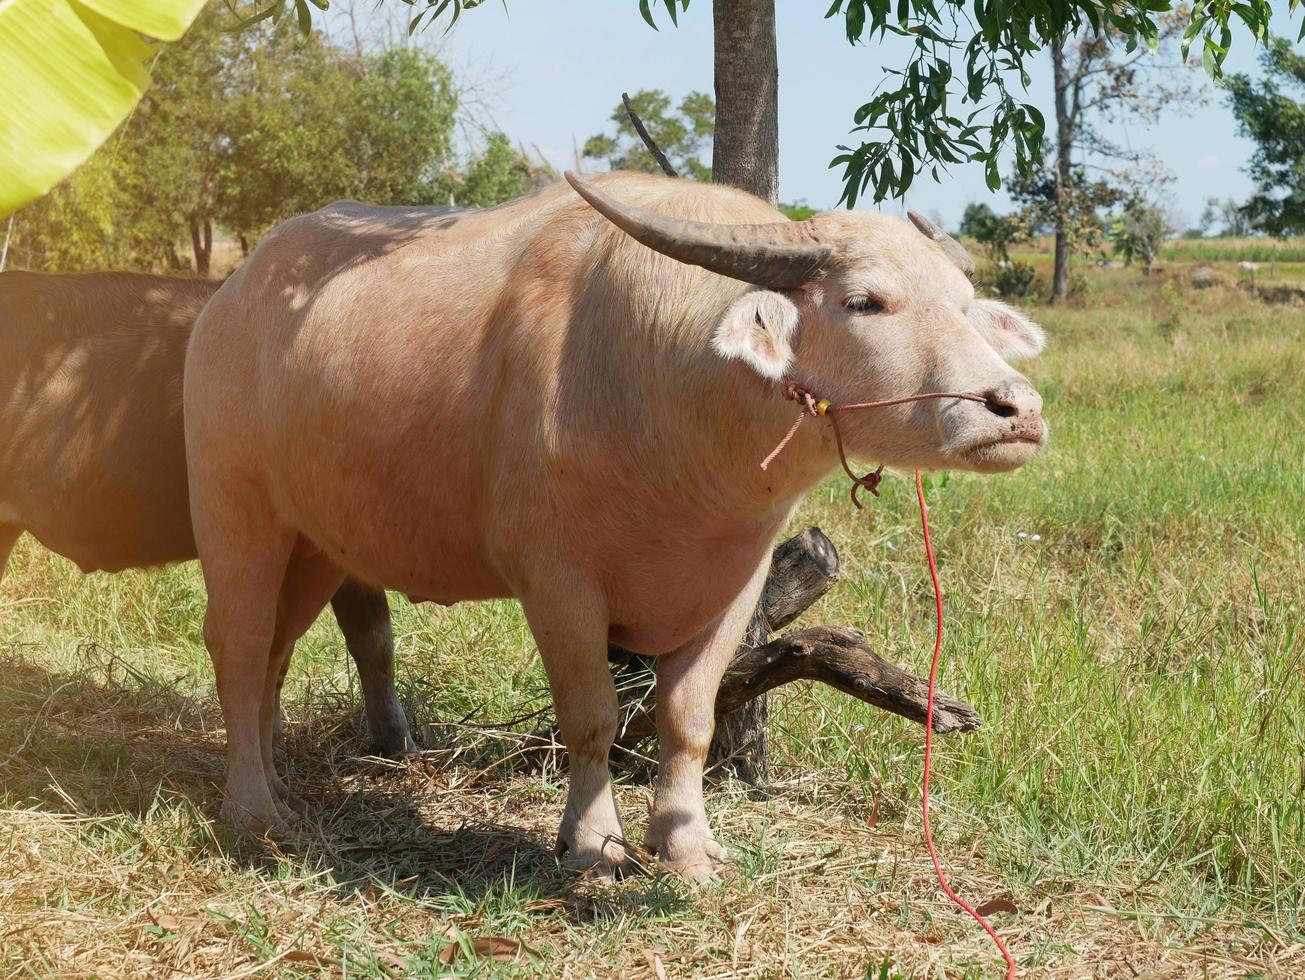 The albino buffalo, a rural animal with a unique genetic skin, has a pinkish skin color. photo